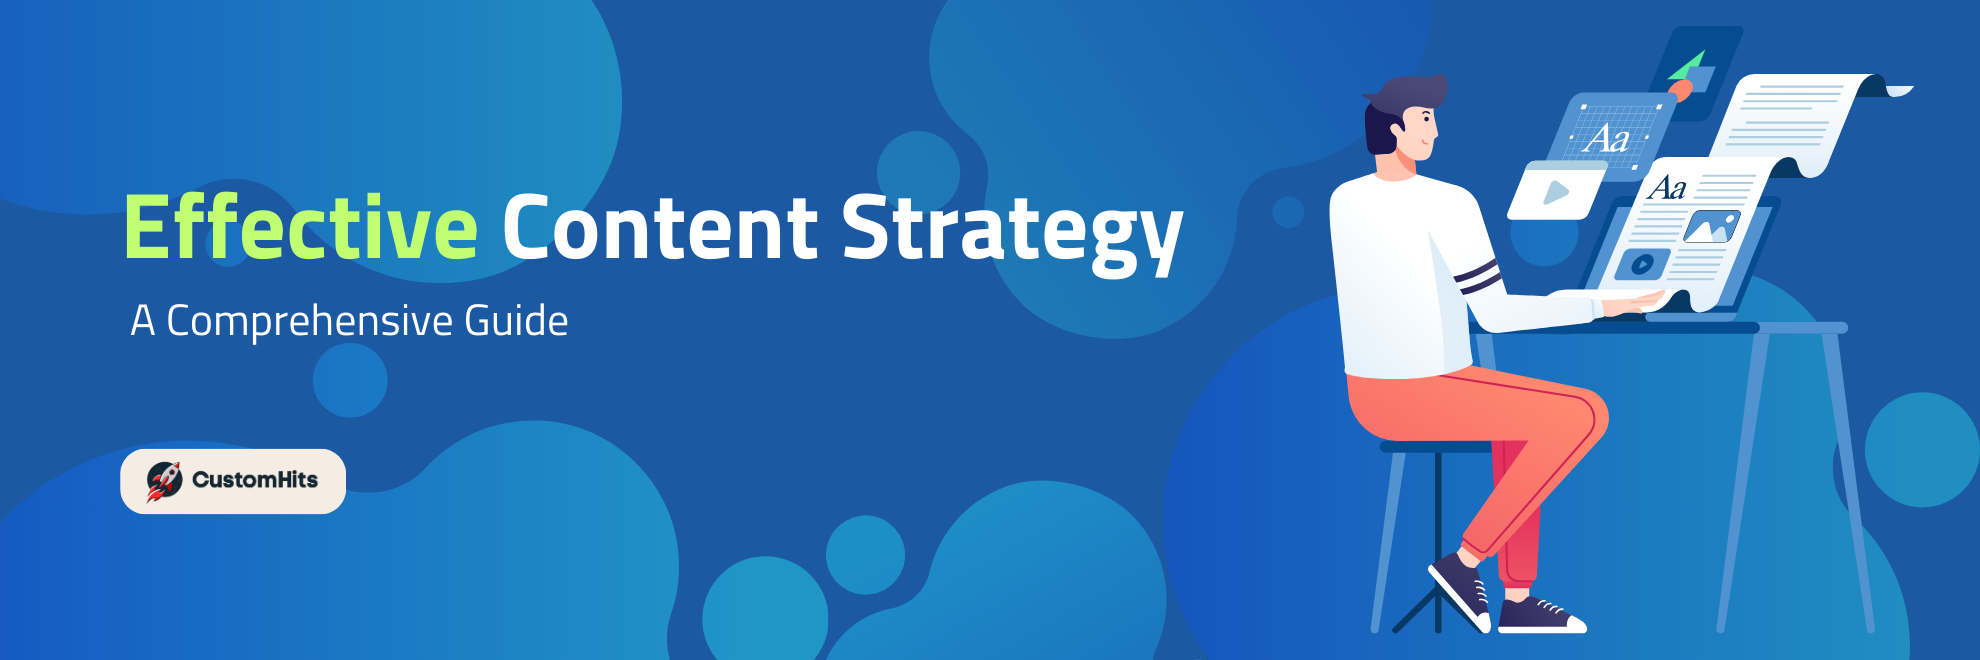 Effective Content Strategy: A Comprehensive Guide